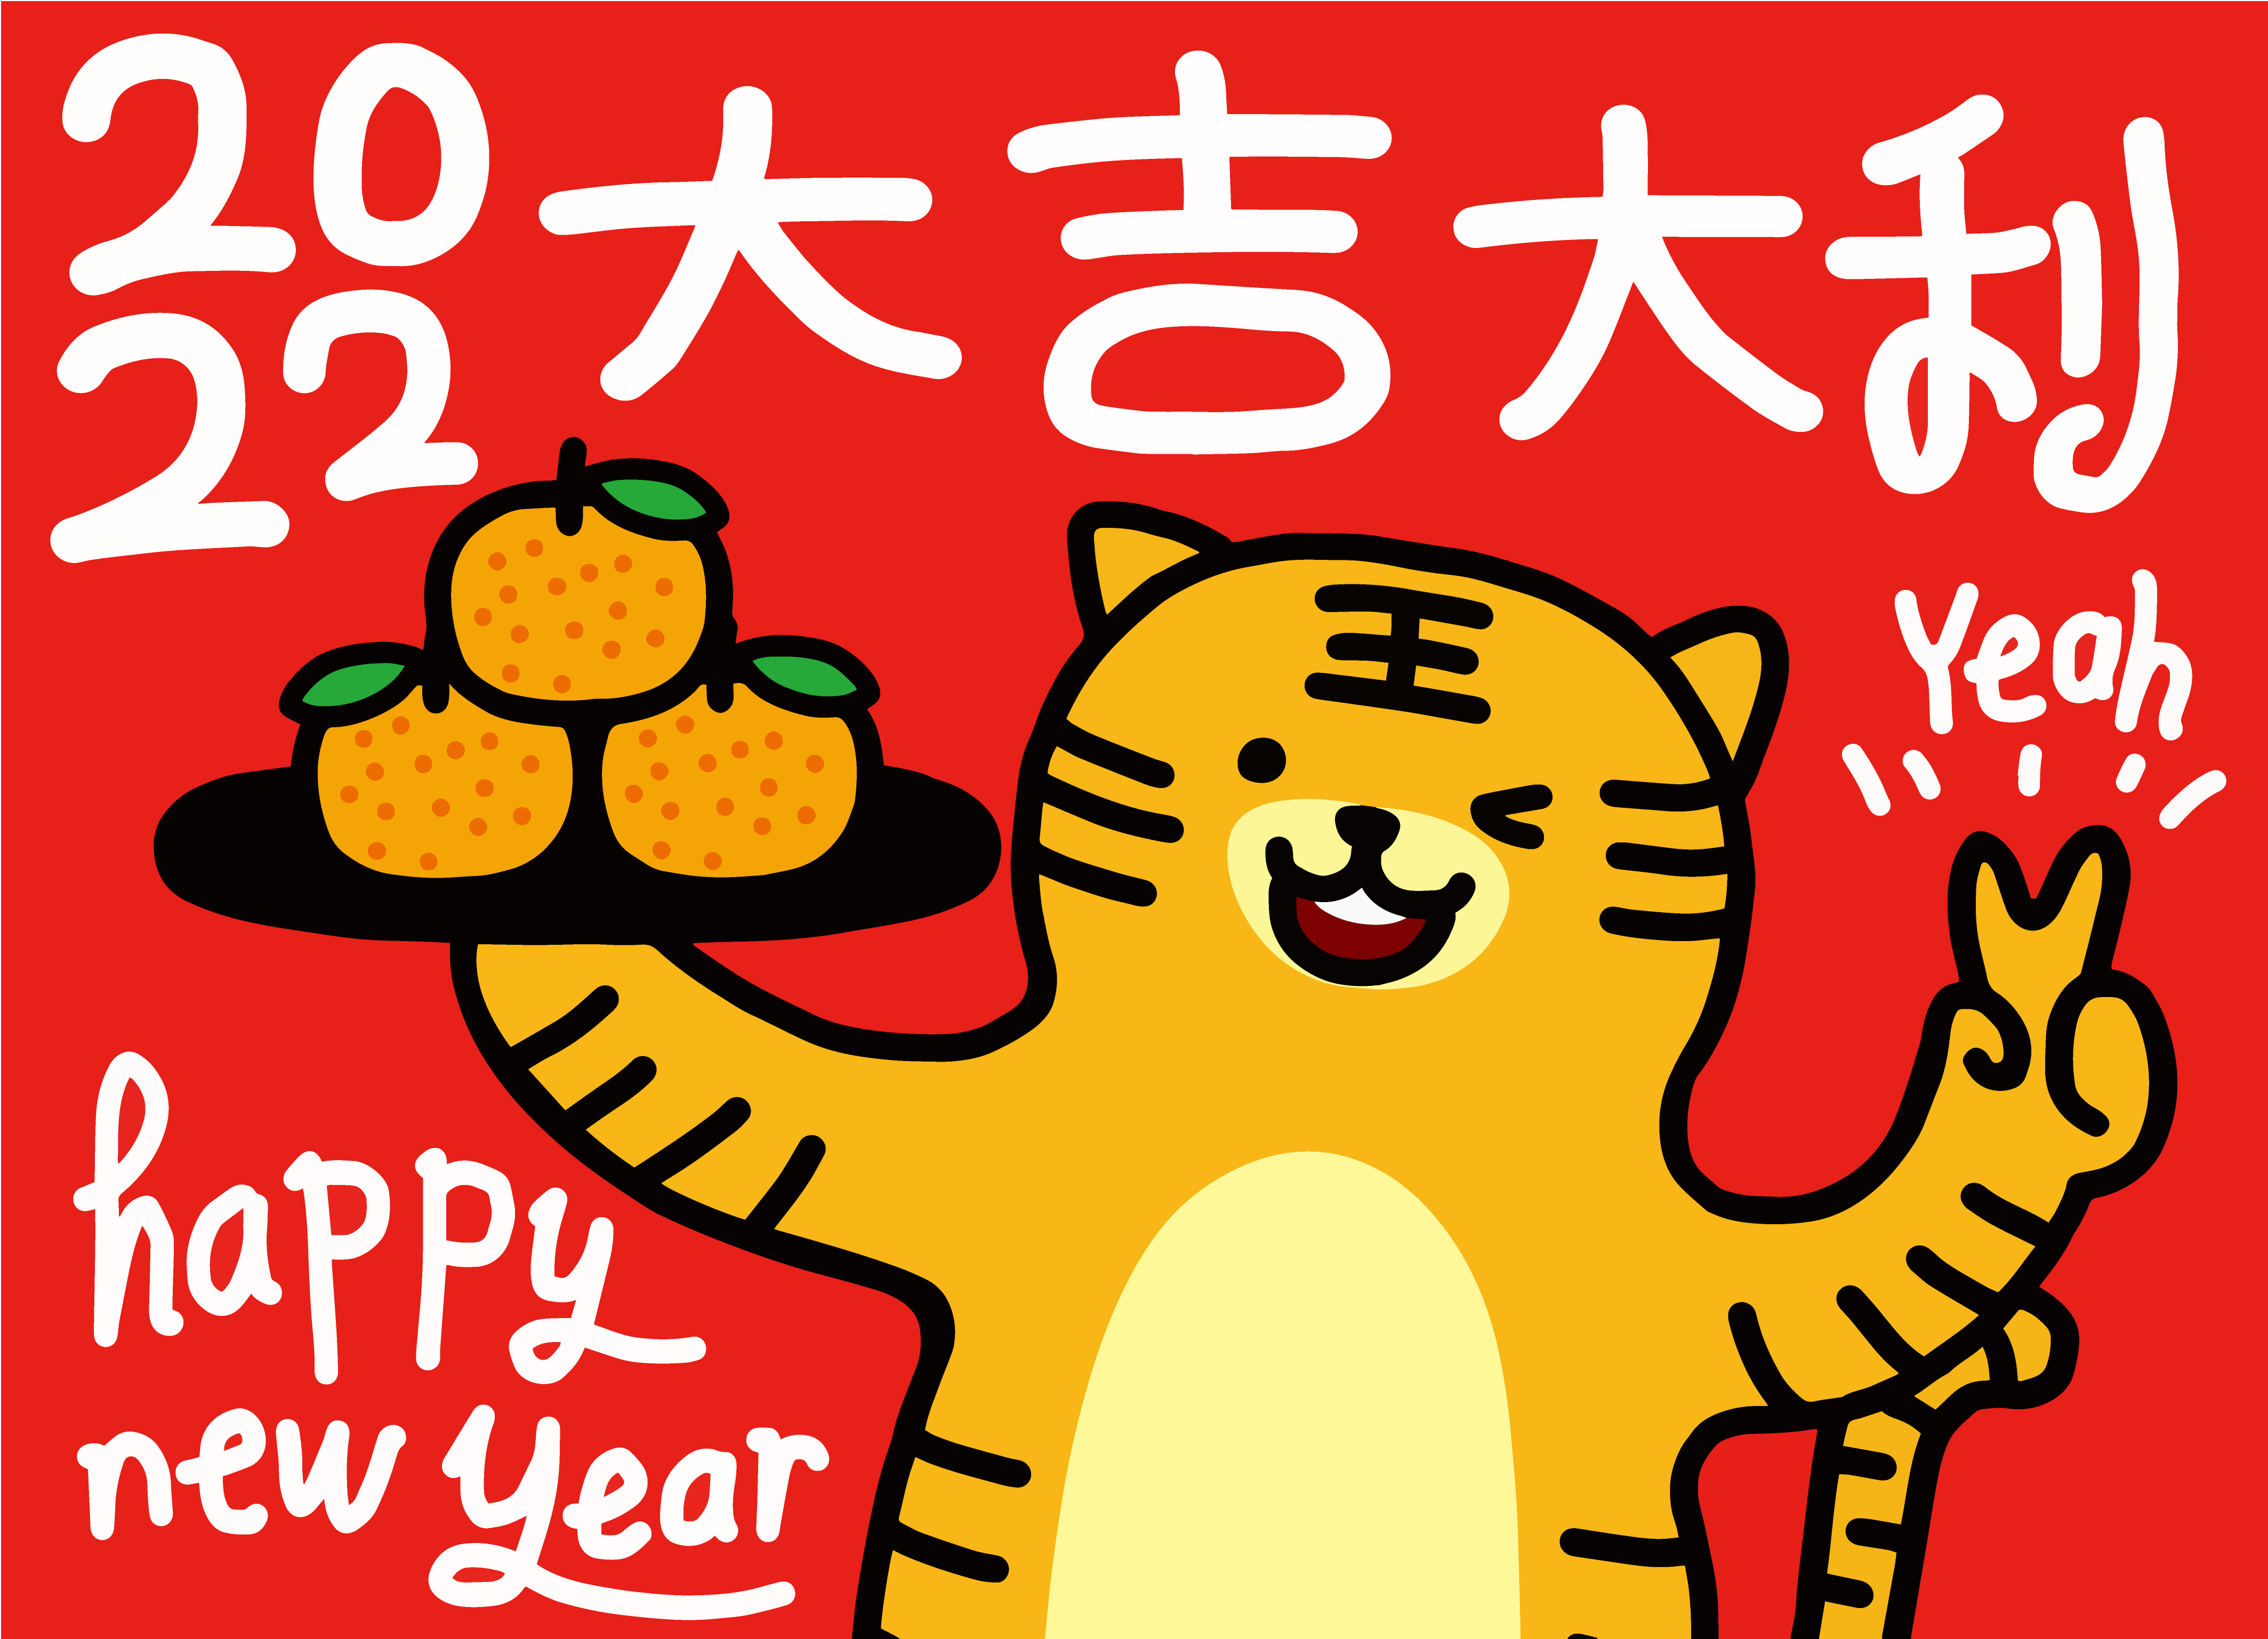 How to Celebrate Chinese New Year: 5 Main Traditions and Activities